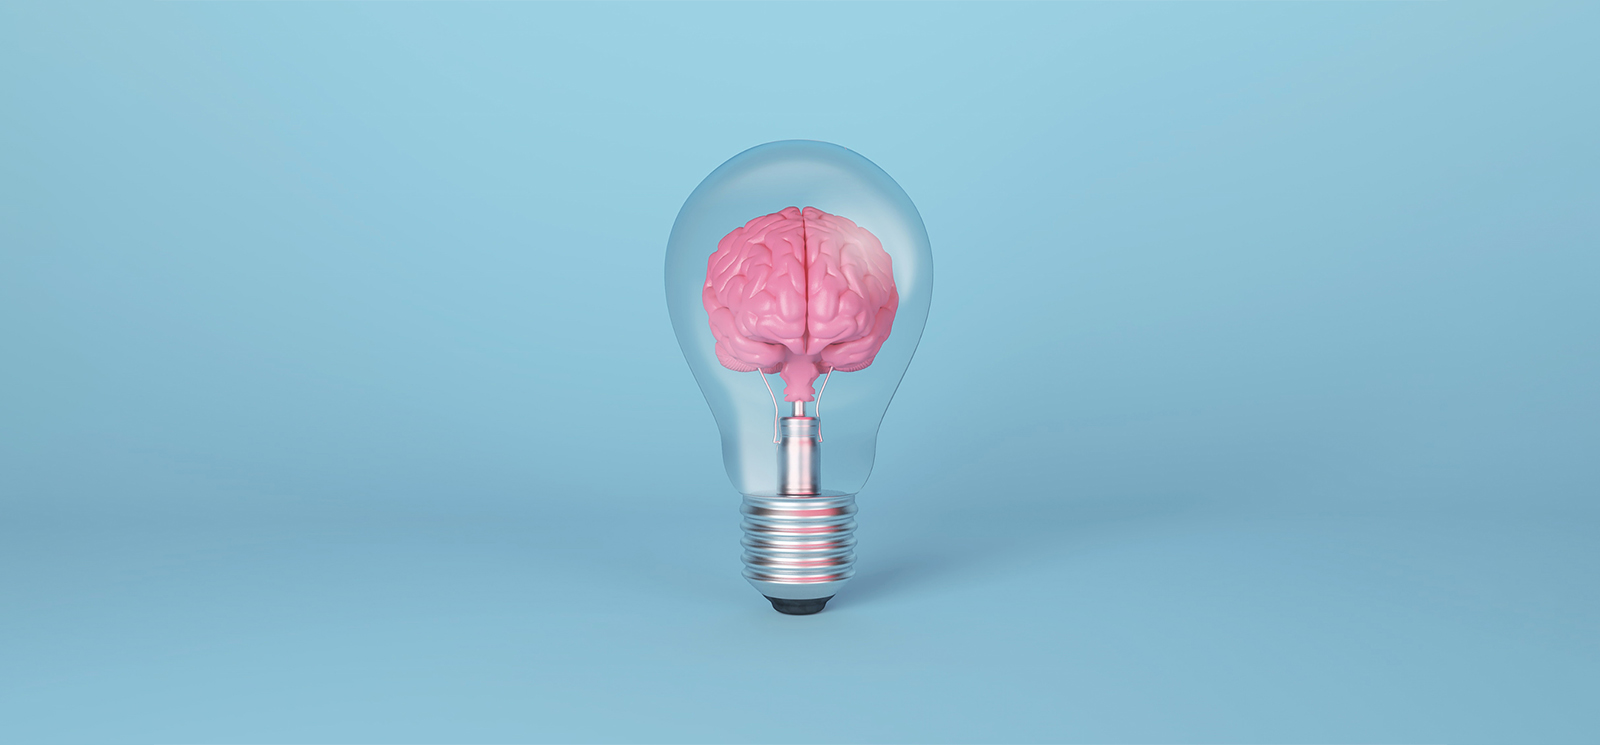 a light bulb containing a pink brain on a light blue background